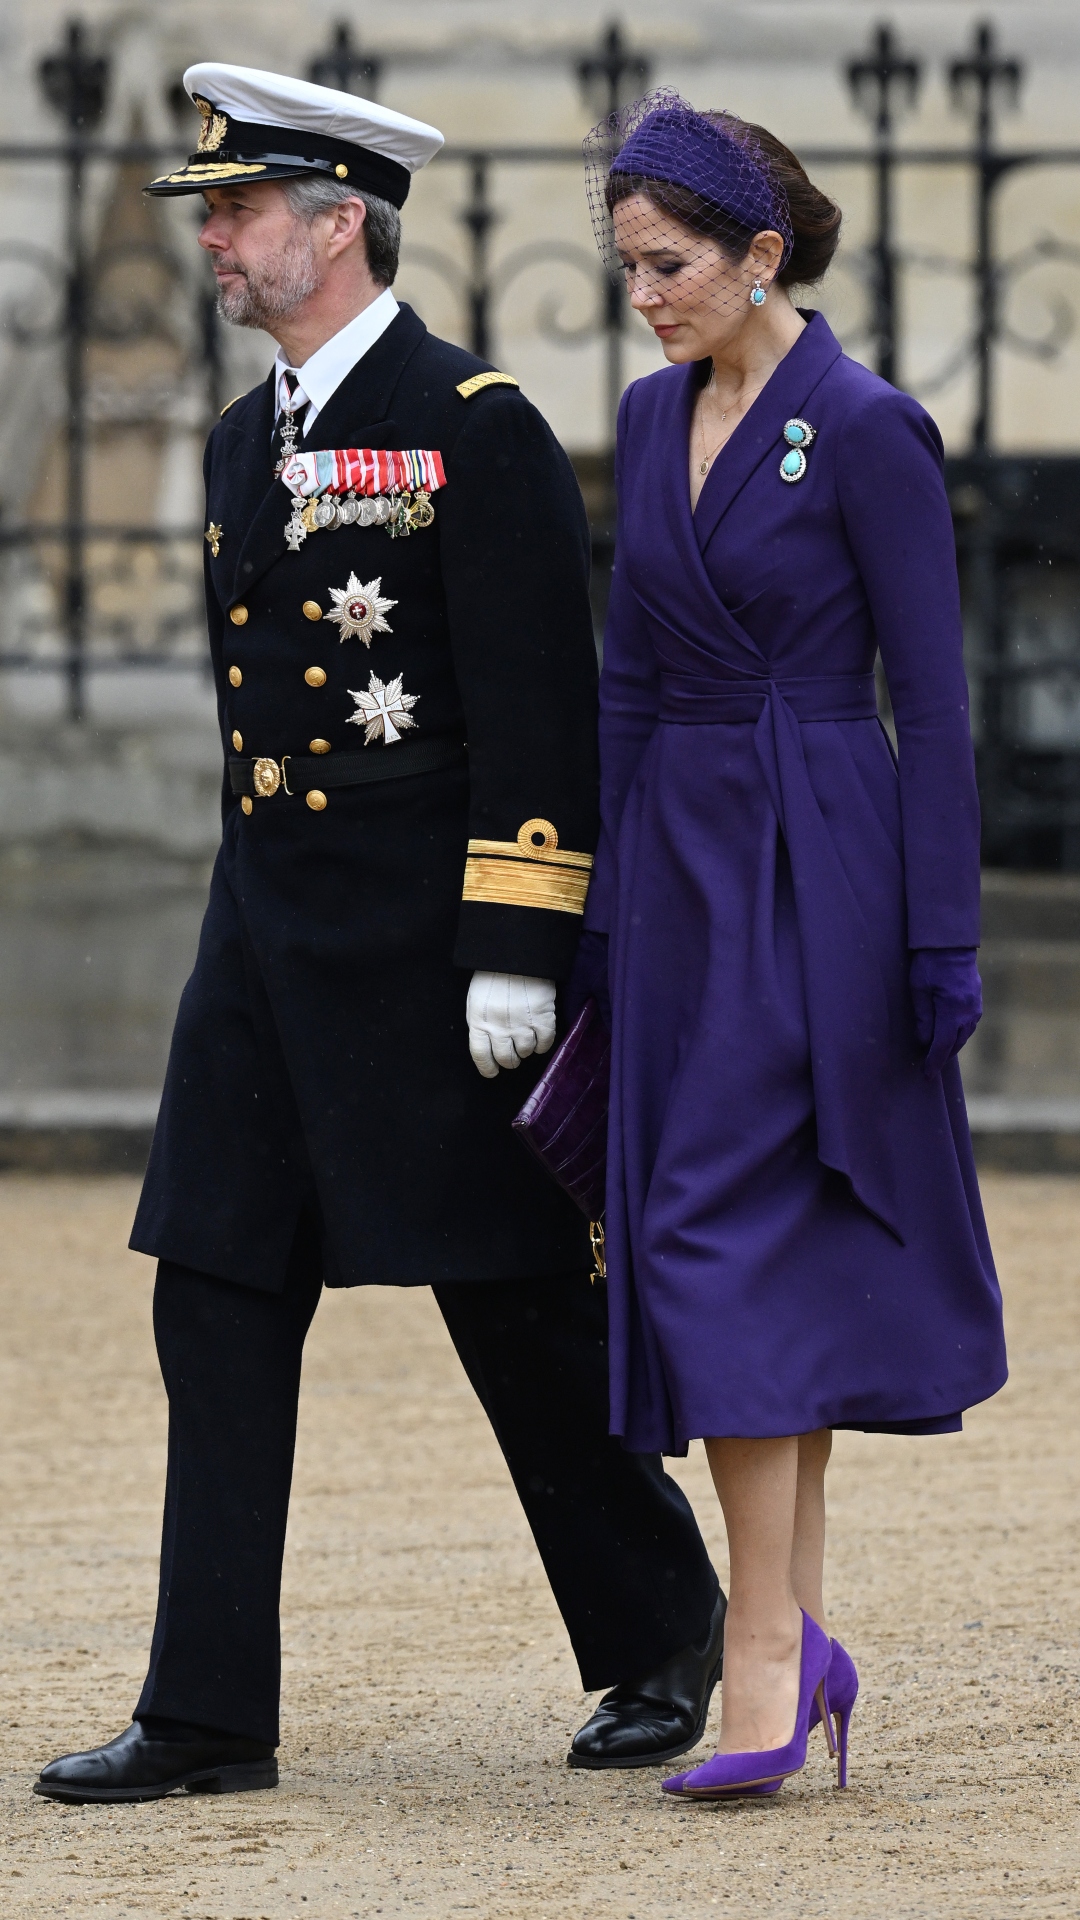 Crown Prince Frederik of Denmark and Mary, Crown Princess of Denmark attend the Coronation of King Charles III and Queen Camilla on May 06, 2023 in London, England. The Coronation of Charles III and his wife, Camilla, as King and Queen of the United Kingdom of Great Britain and Northern Ireland, and the other Commonwealth realms takes place at Westminster Abbey today. Charles acceded to the throne on 8 September 2022, upon the death of his mother, Elizabeth II.